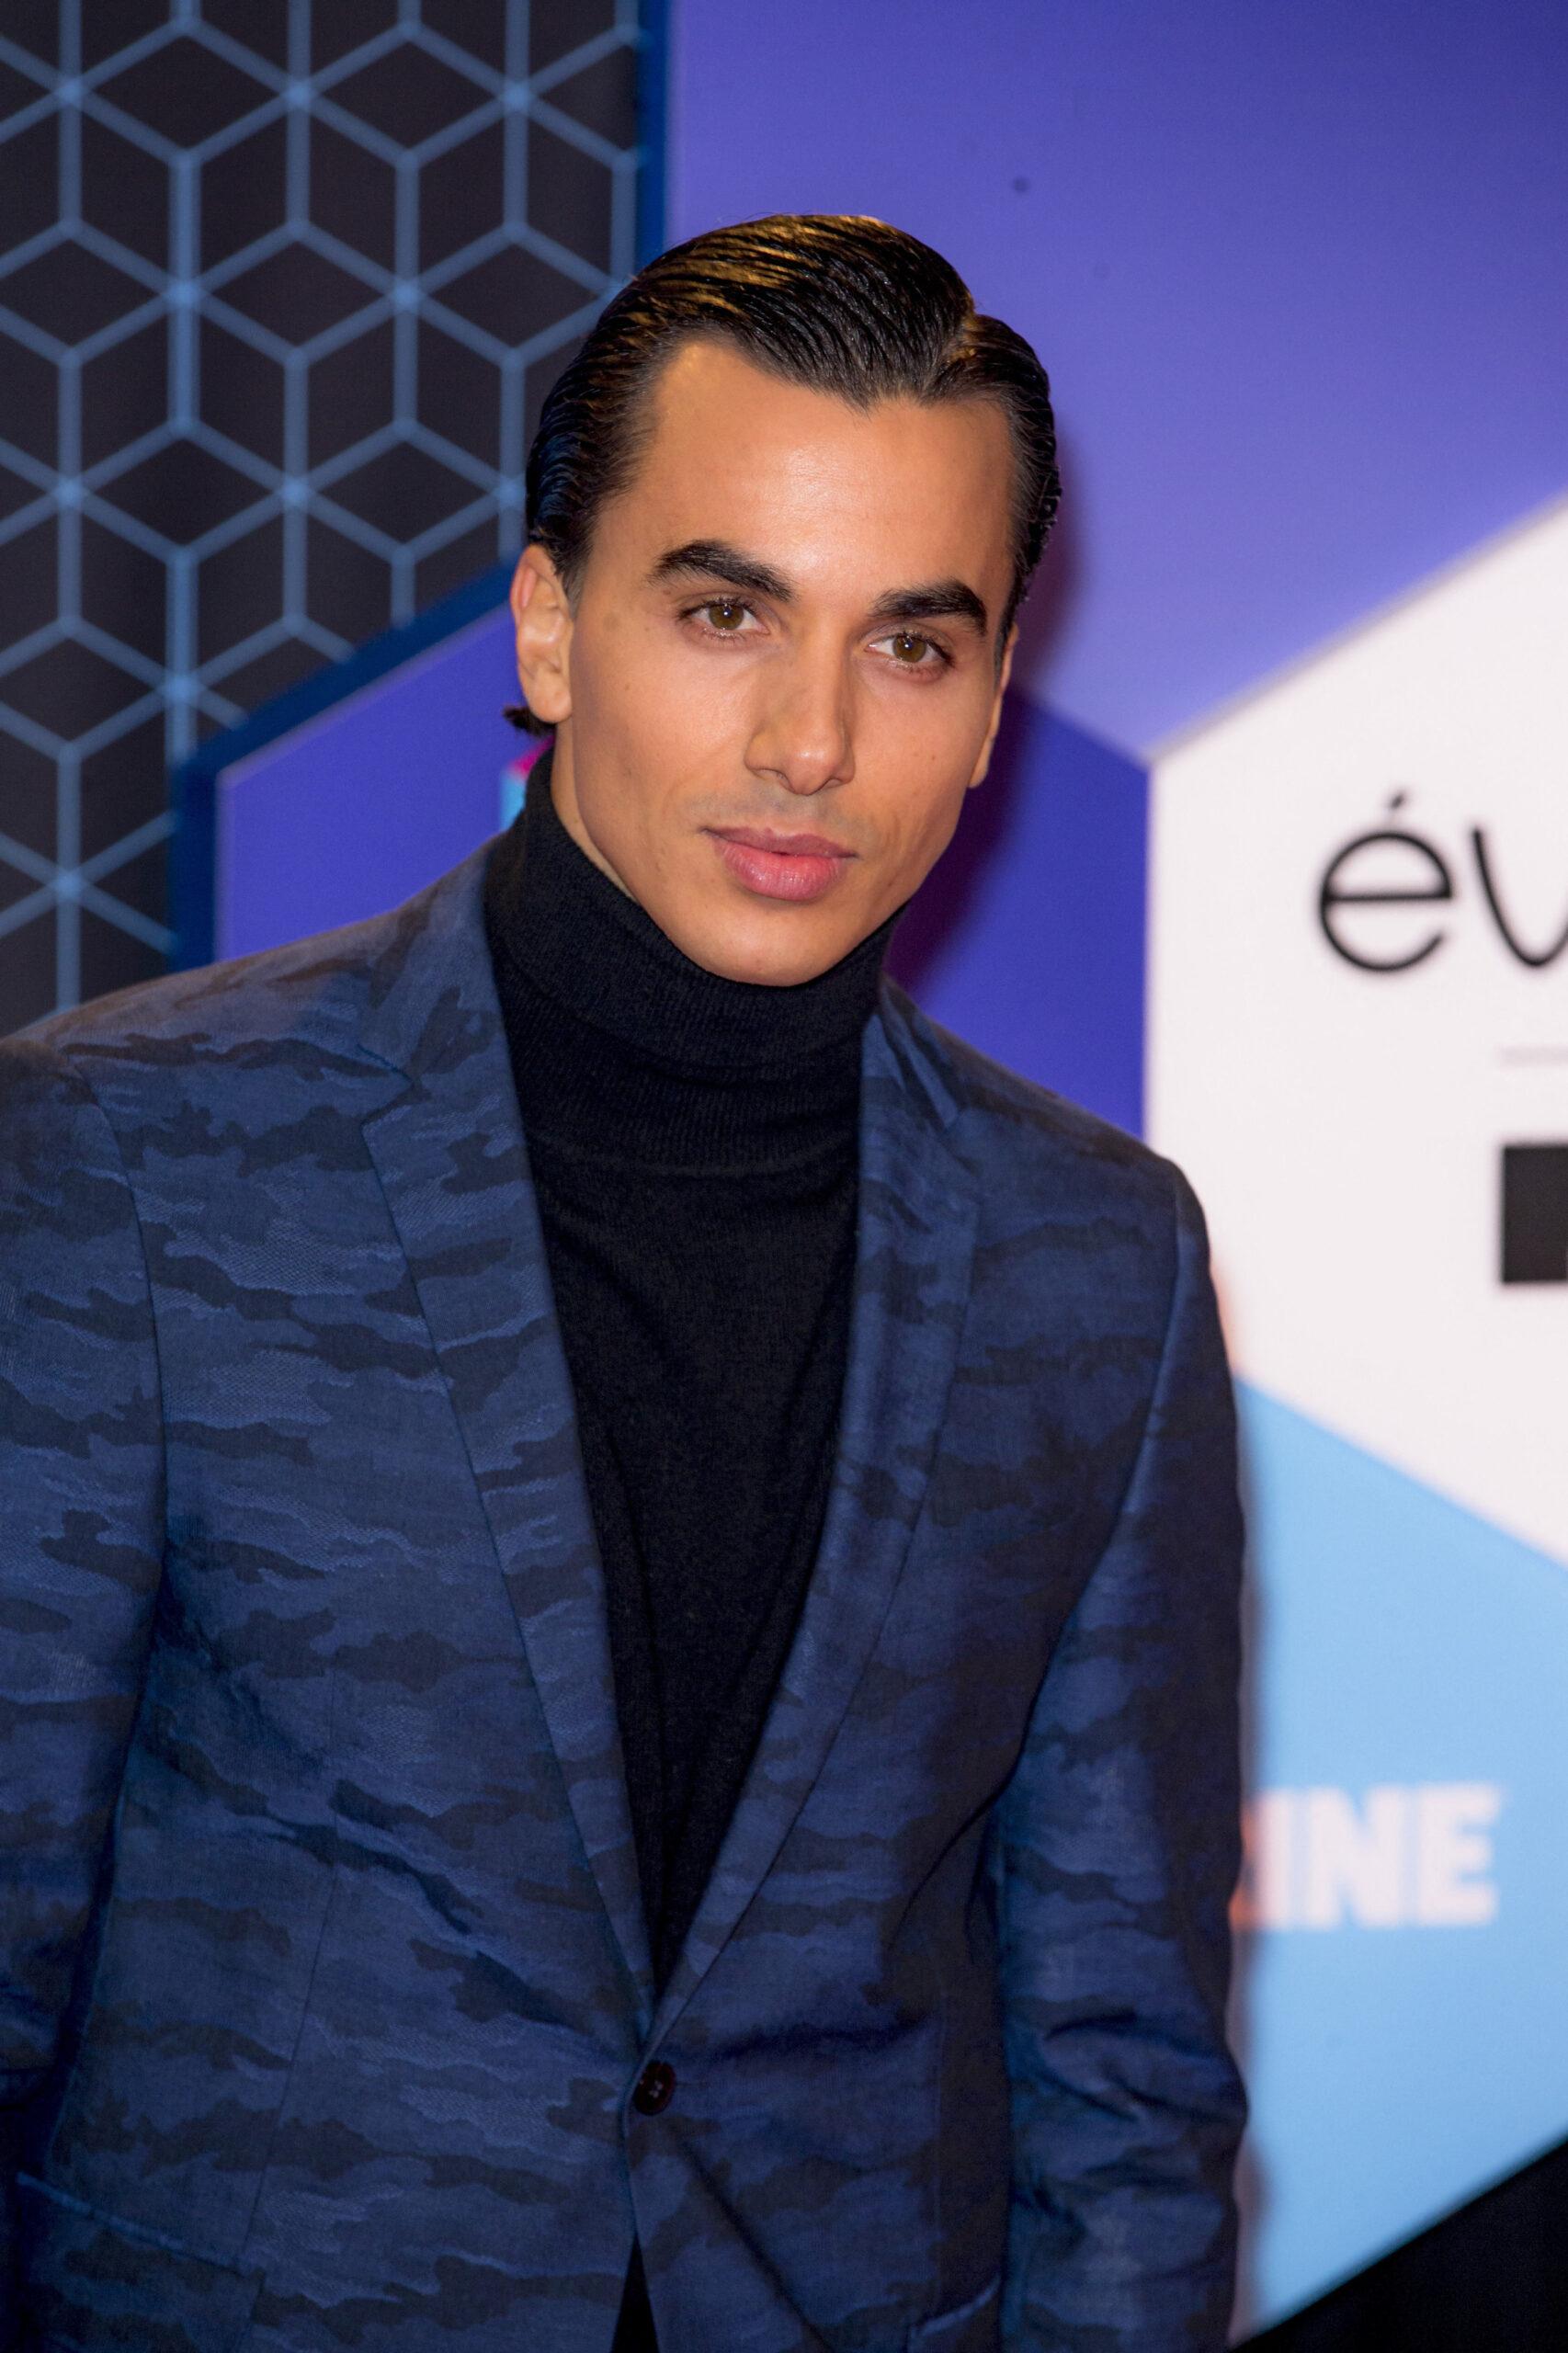 Timor Steffens arrives at the MTV Europe Music Awards in Rotterdam